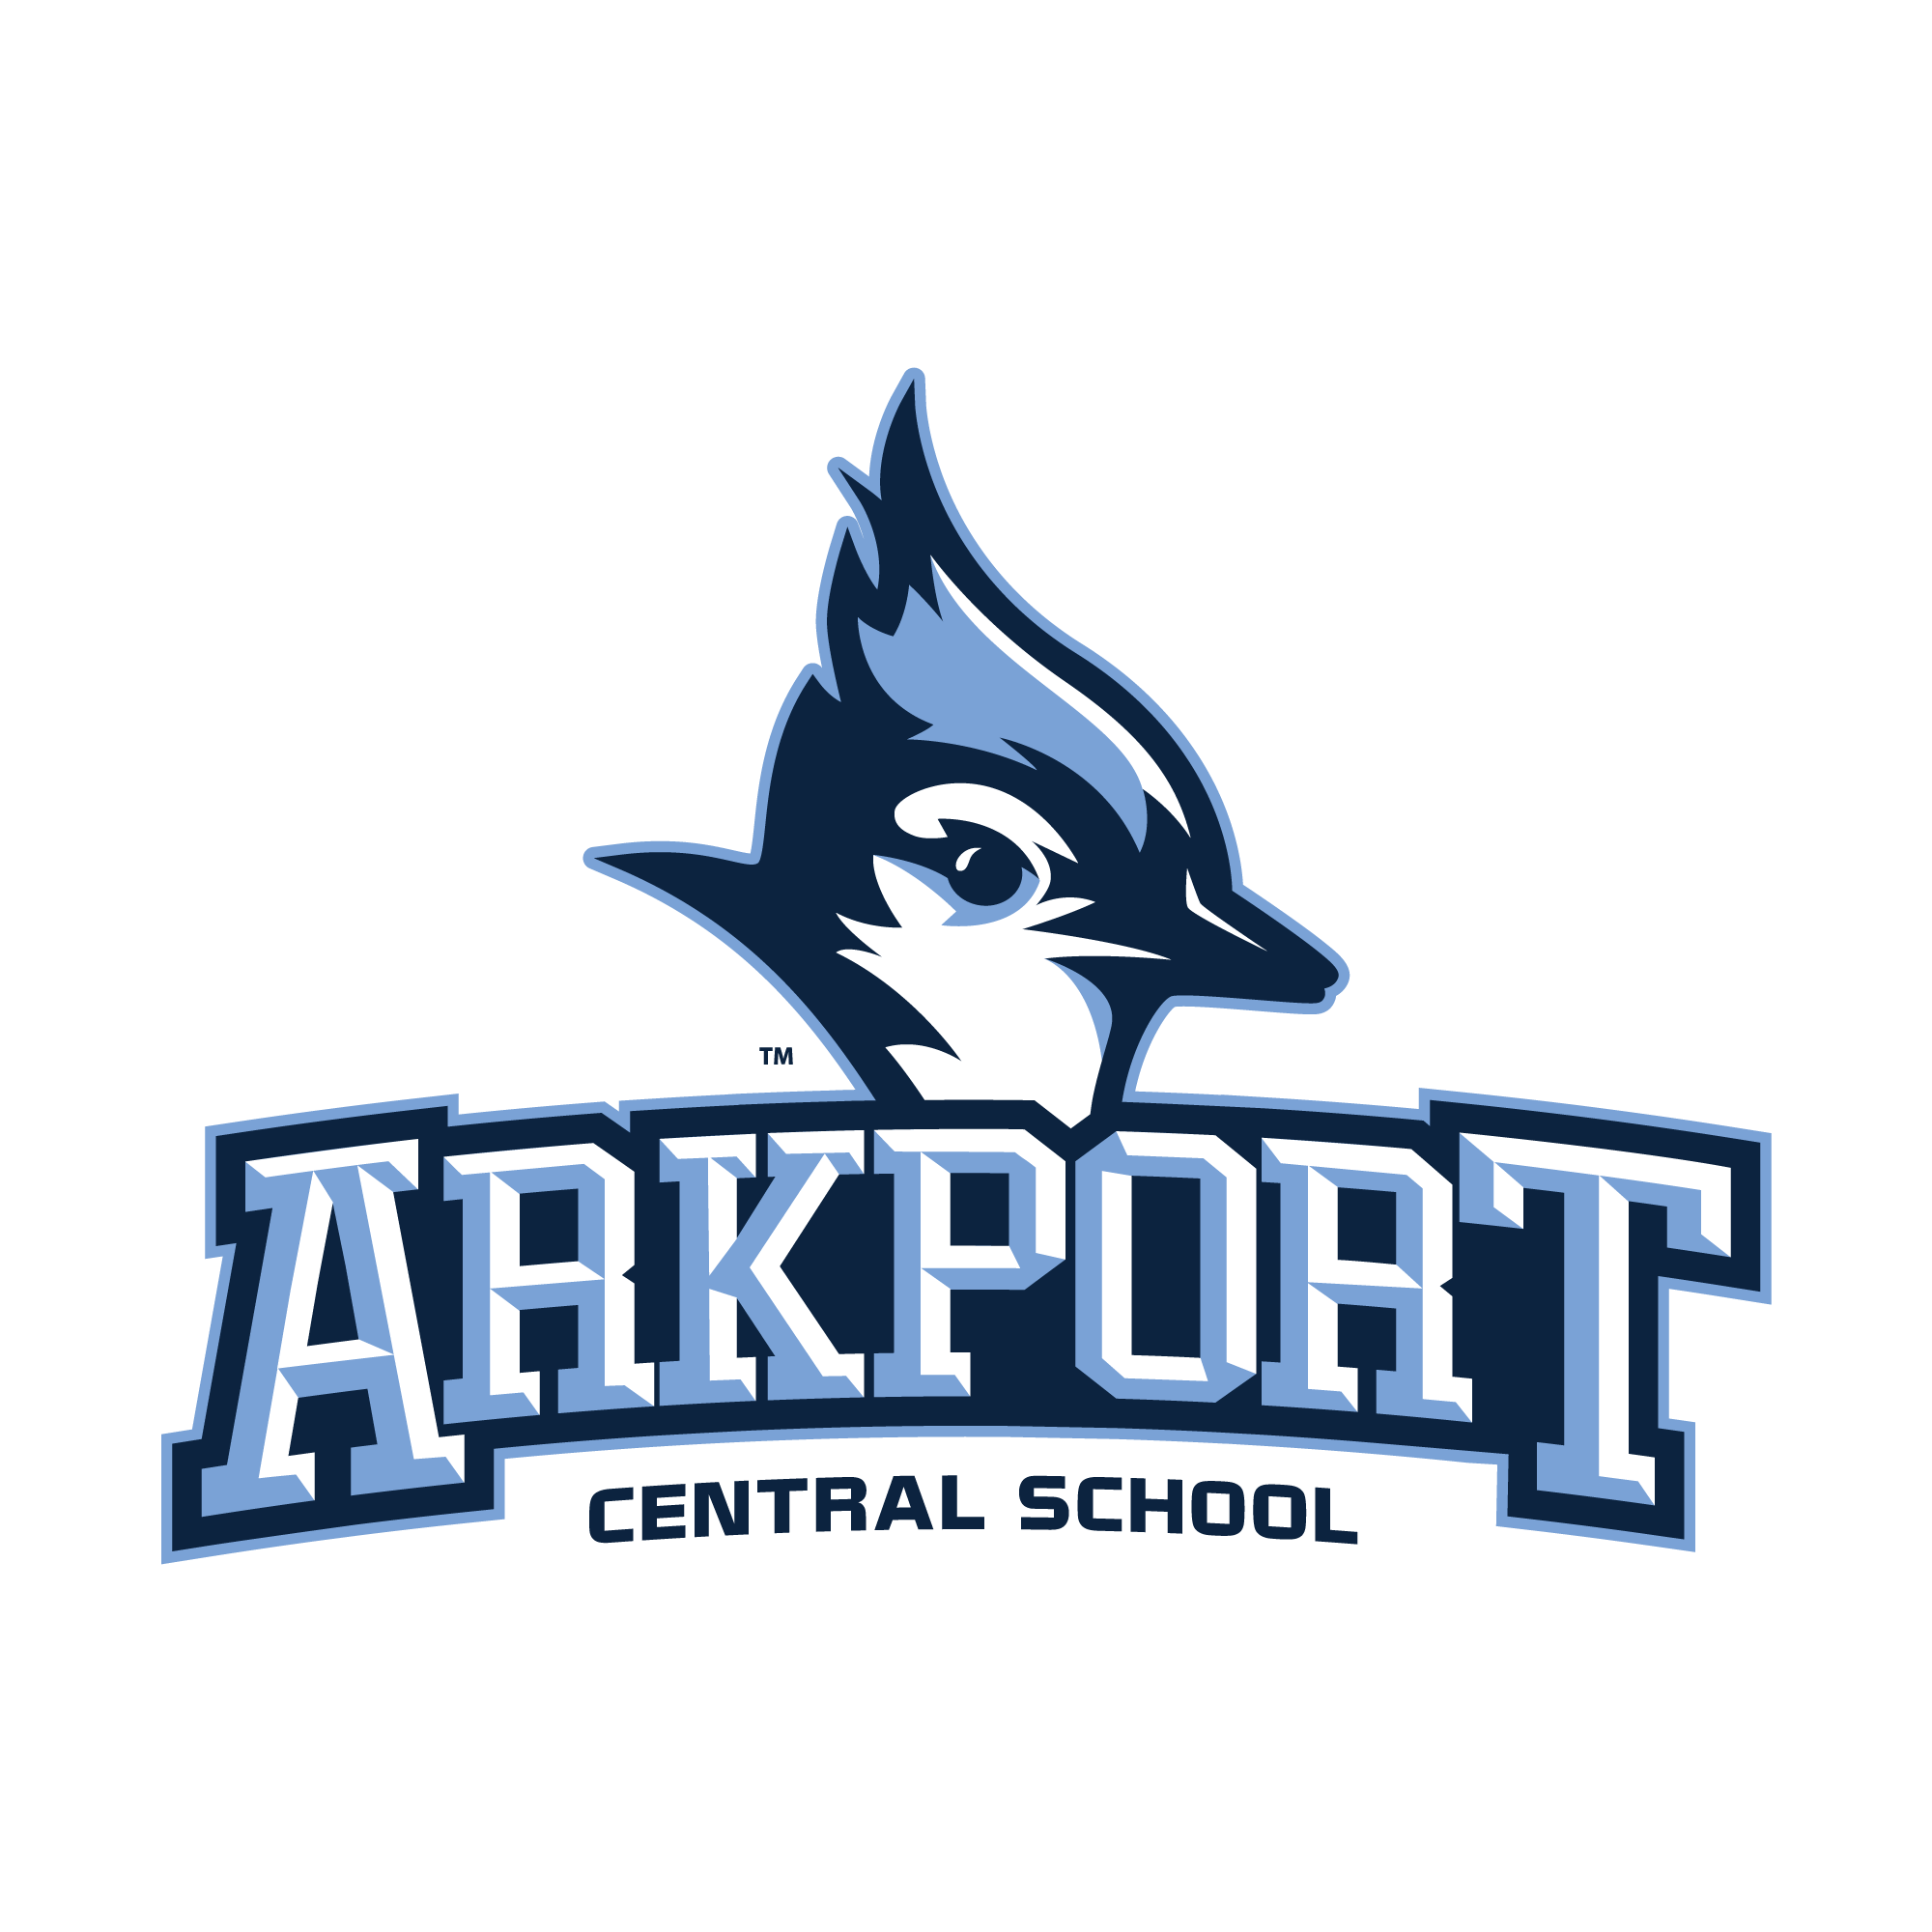 Arkport Central School